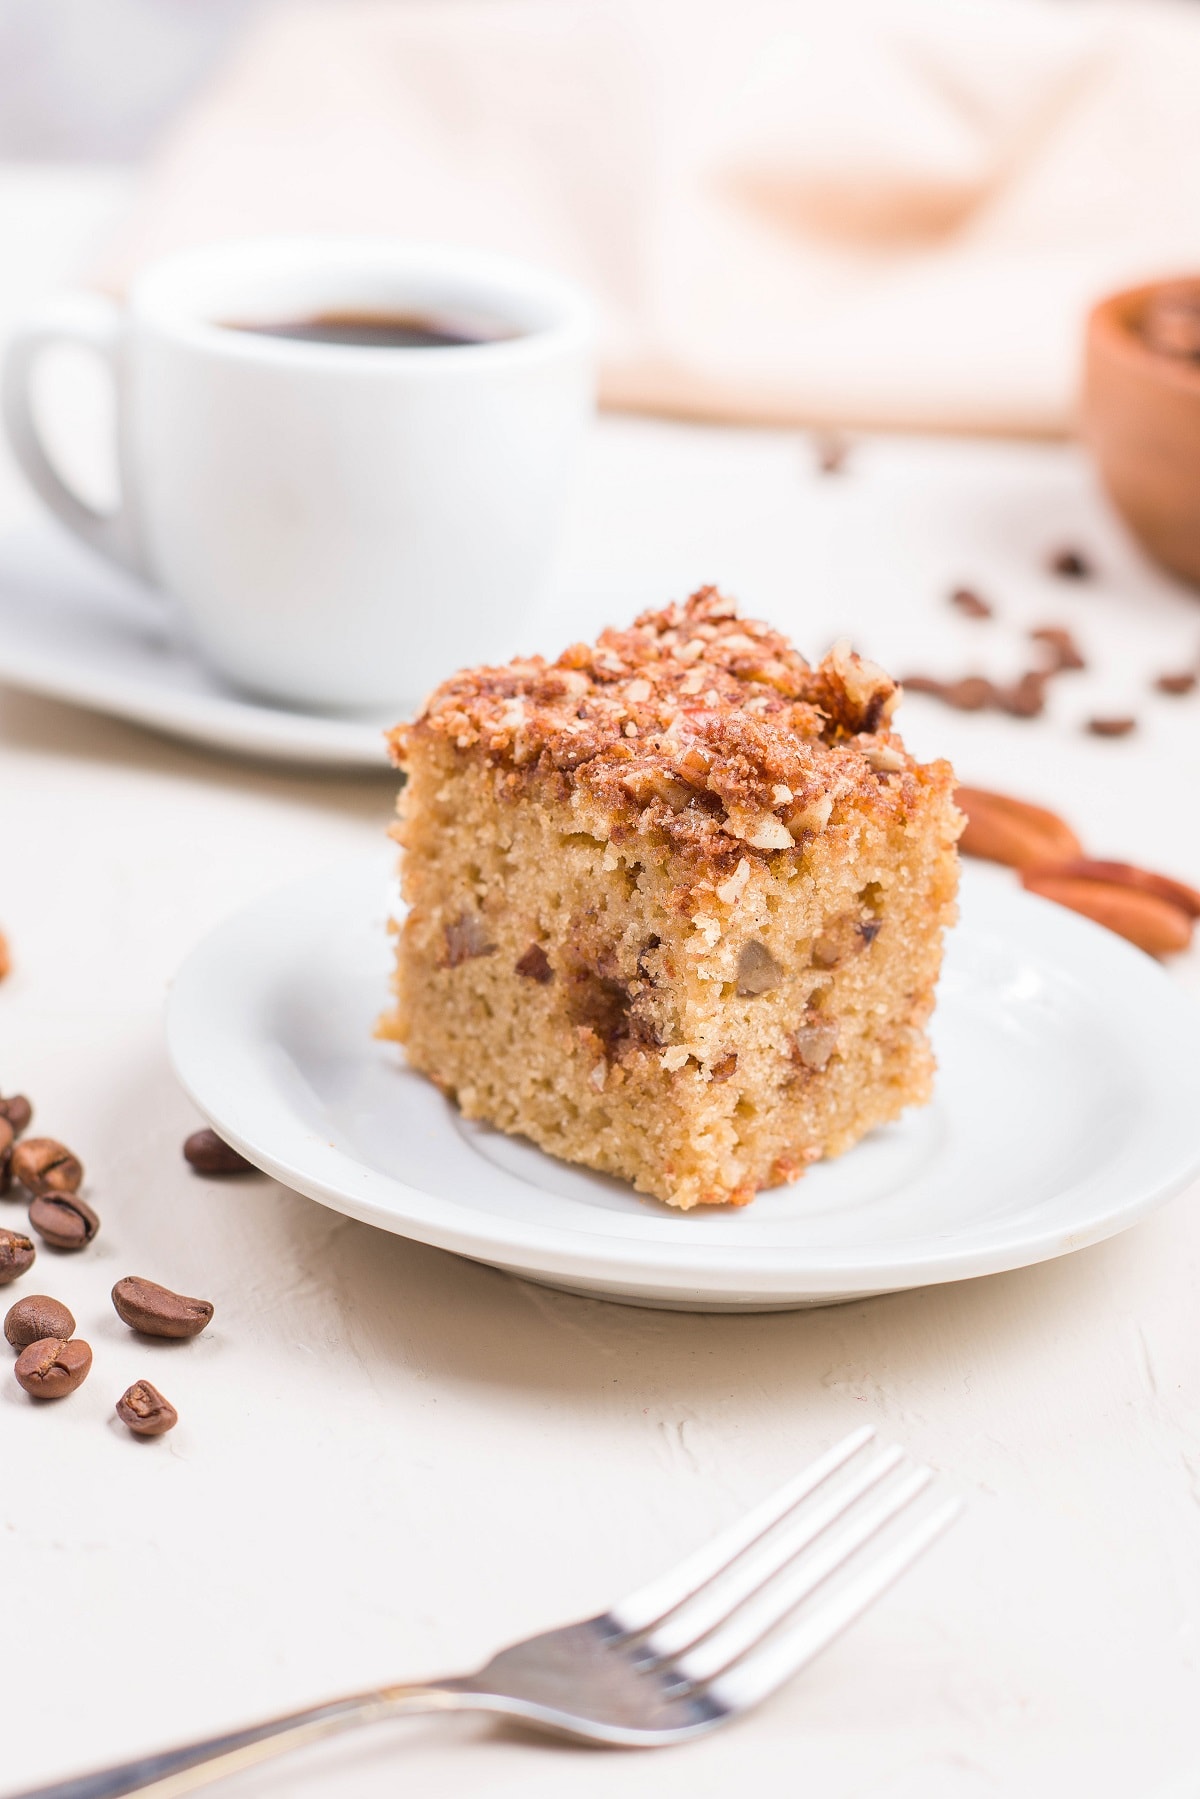 Slice of almond flour coffee cake on a plate with more slices in the background.